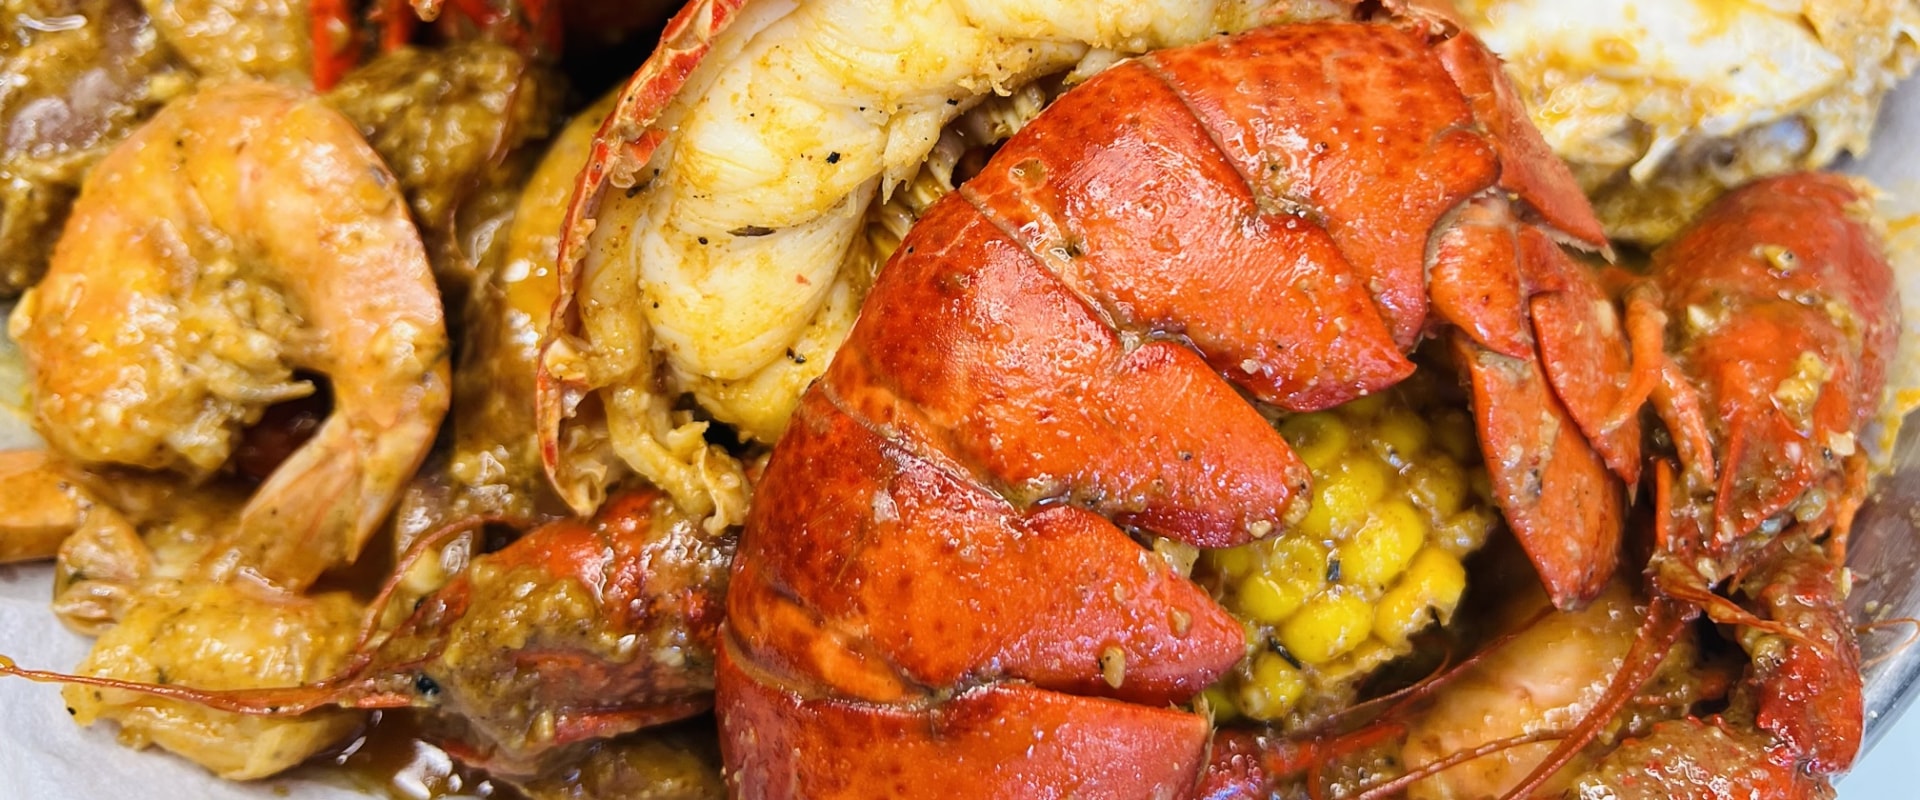 Seafood Restaurants in Clark County, Nevada: A Comprehensive Guide